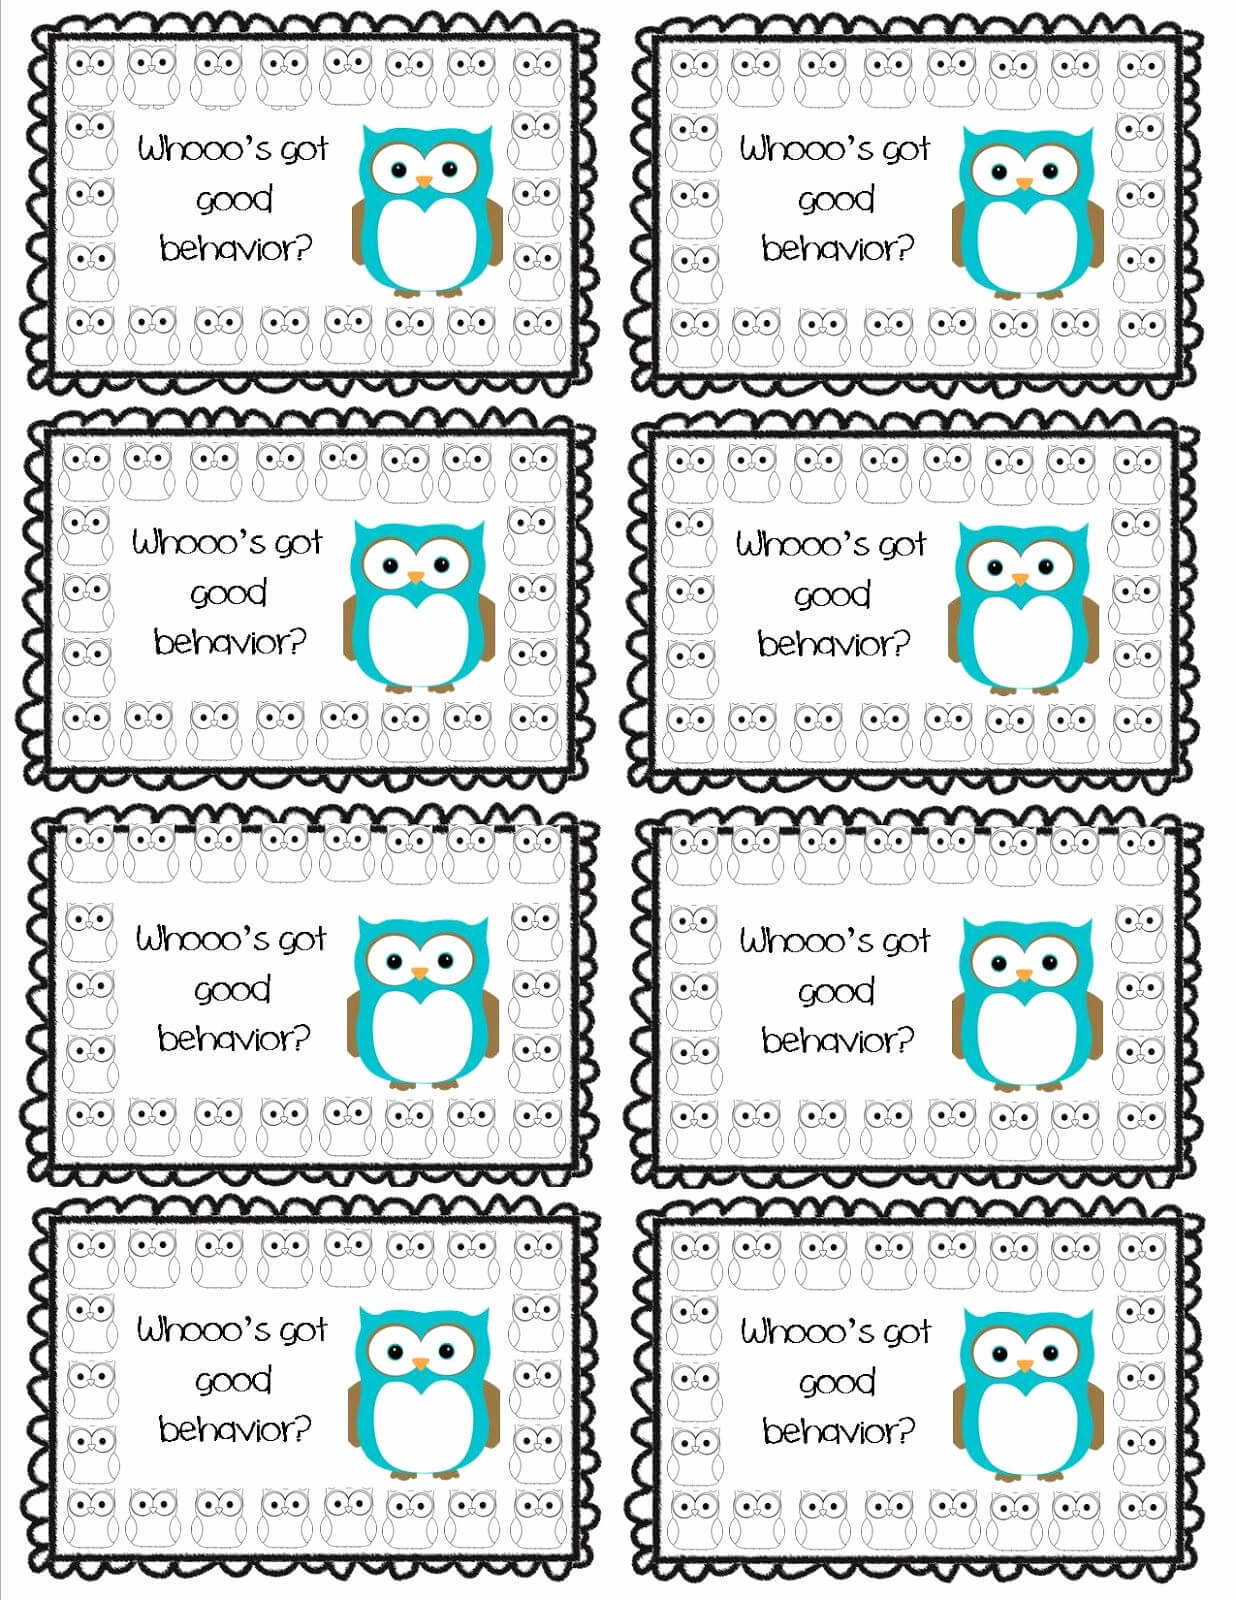 Free Printable Punch Card Template And Whooo S Got Good In Free Printable Punch Card Template